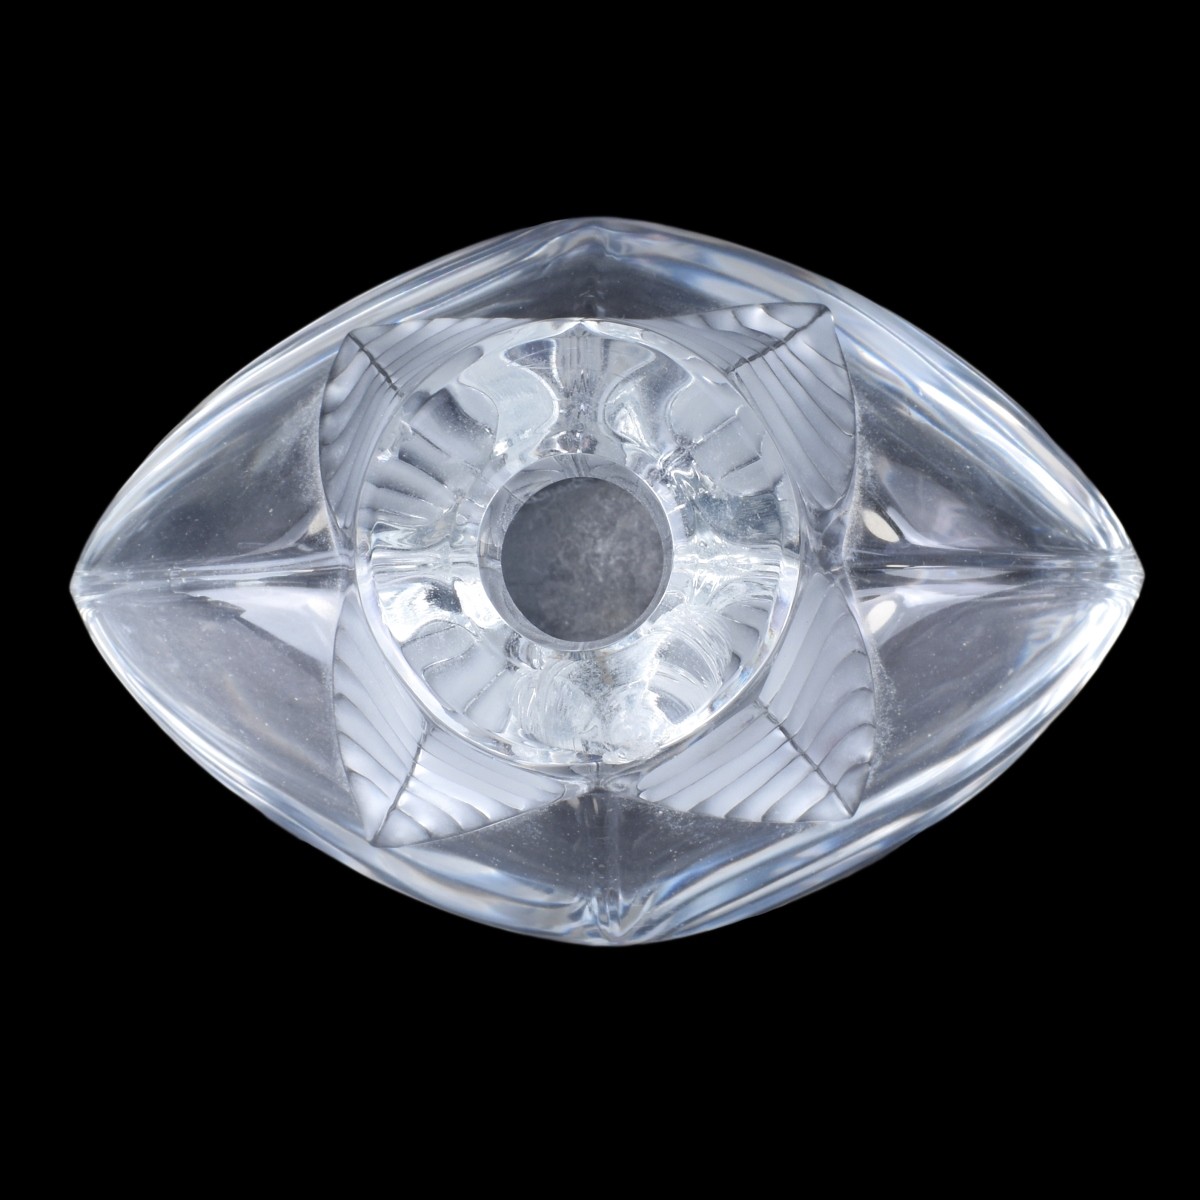 Lalique Crystal Bottle and Lalique Crystal Plaque